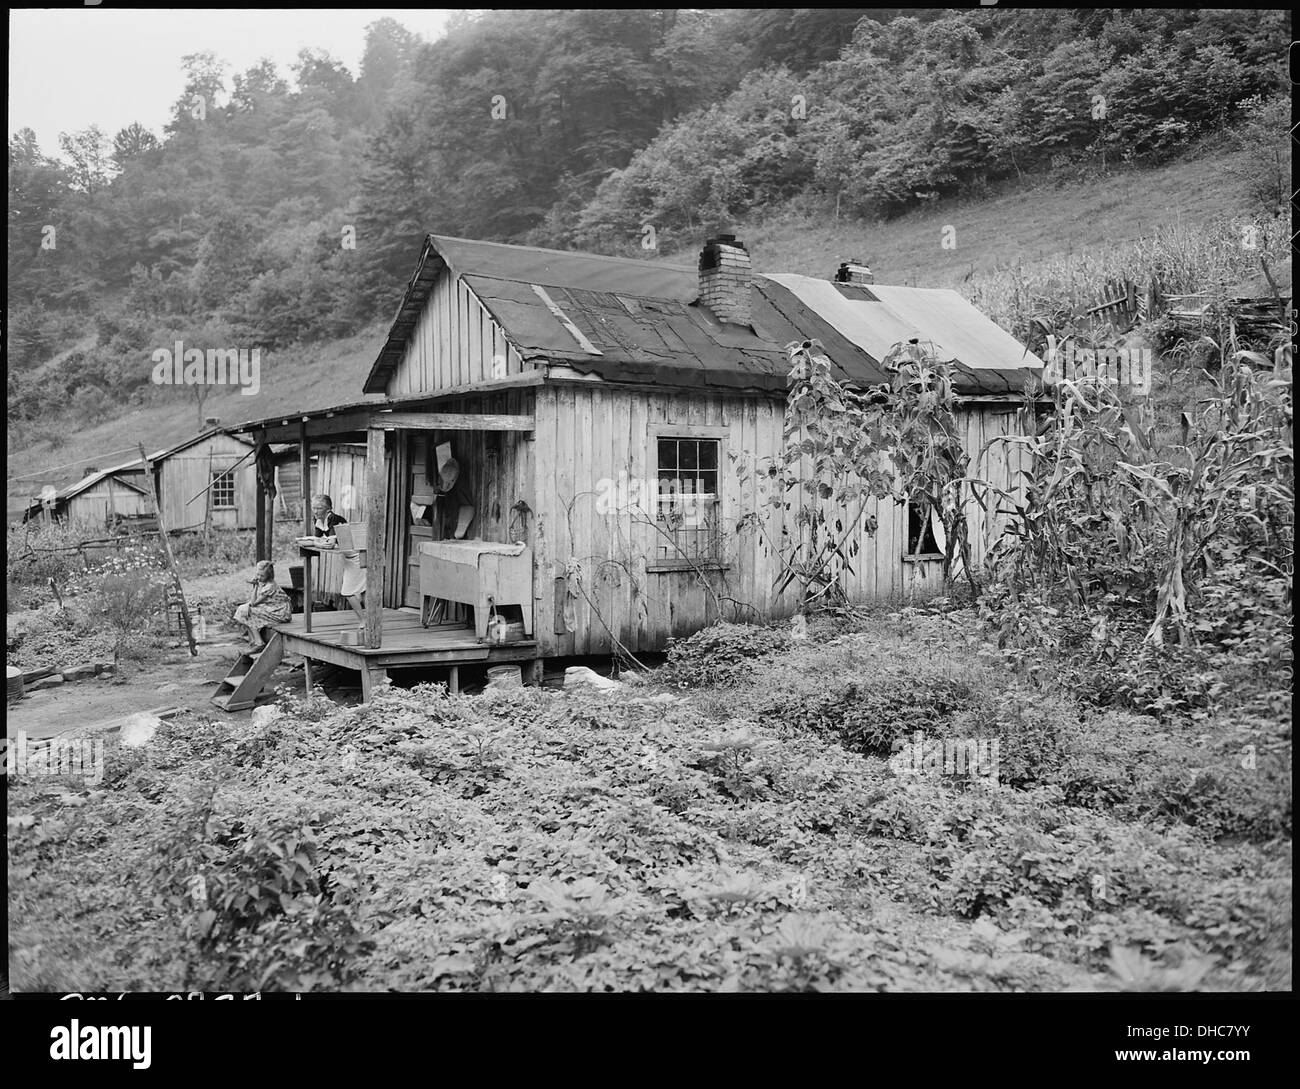 One of the houses rented to miners in this mine. P V & K Coal Company, Clover Gap Mine, Lejunior, Harlan County... 541360 Stock Photo